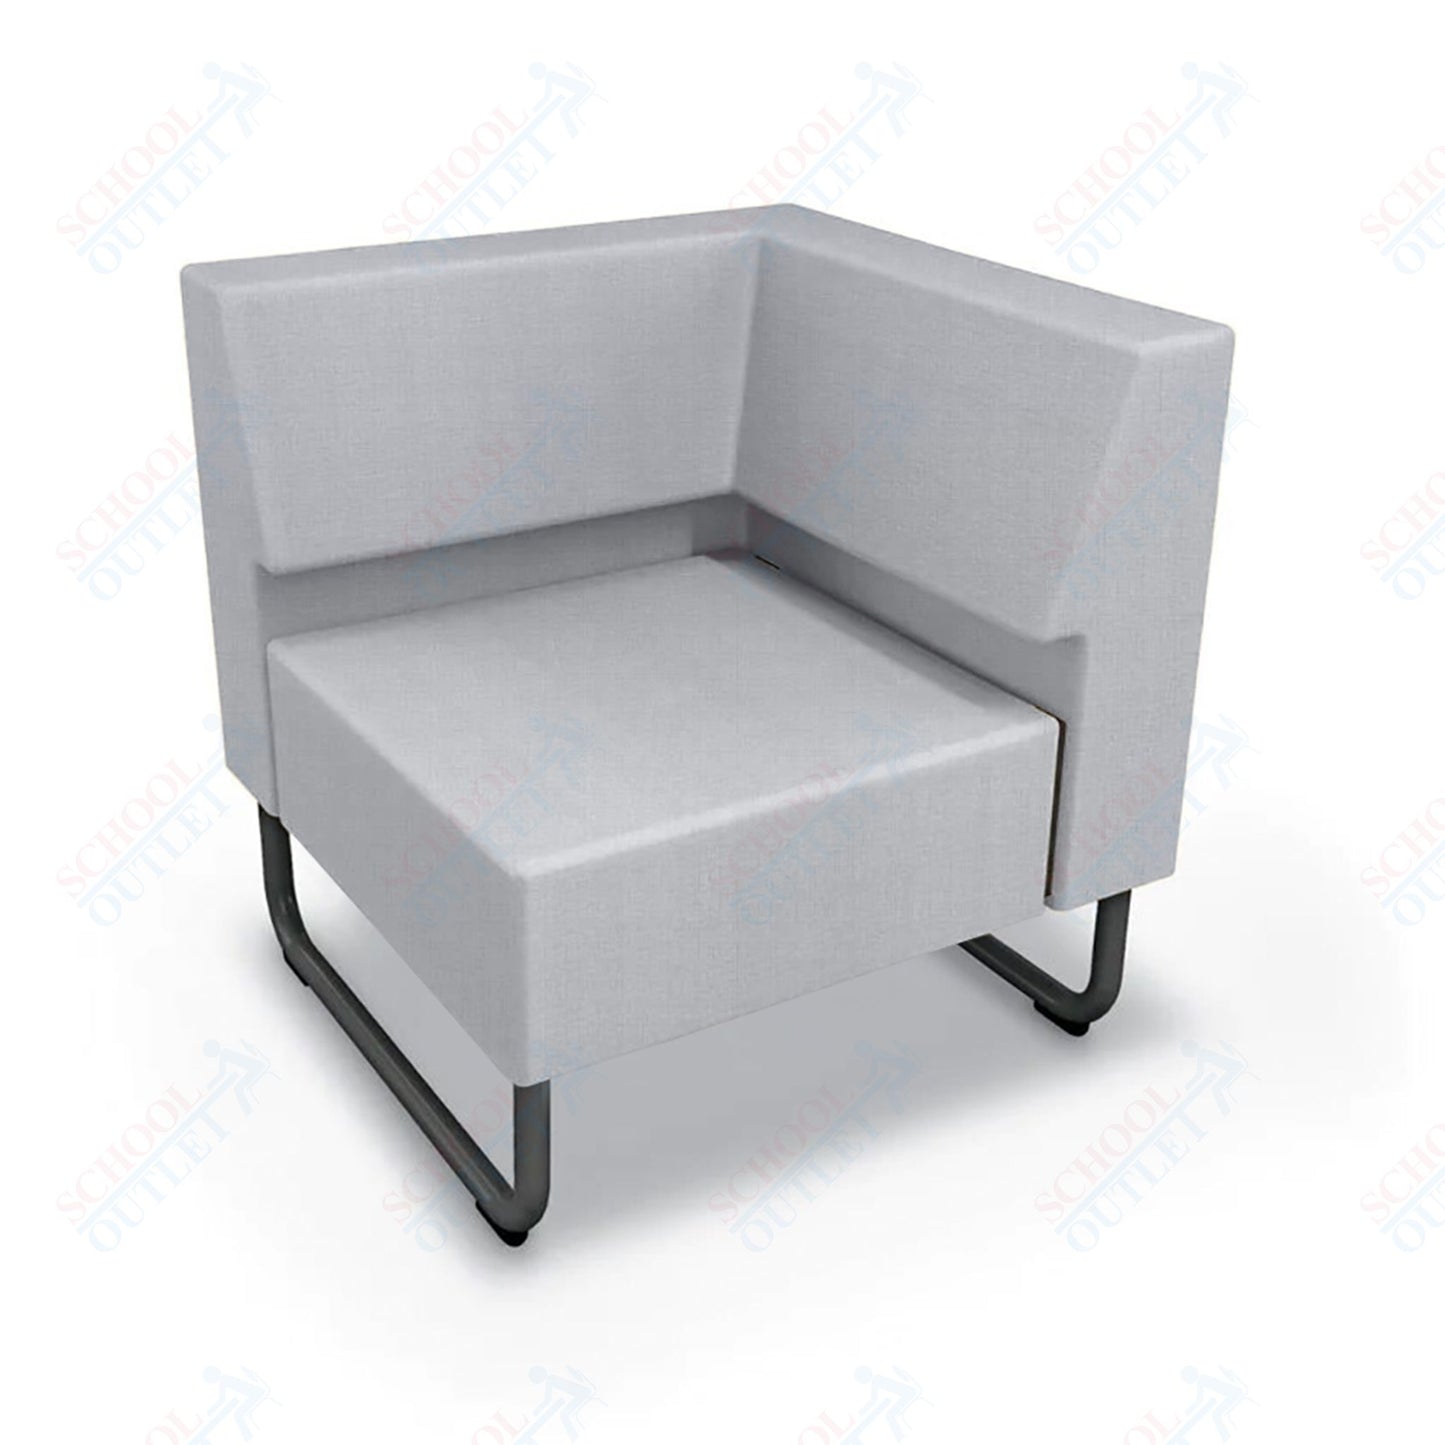 Mooreco Akt Soft Seating Lounge Corner Chair - Grade 02 Fabric and Powder Coated Sled Legs